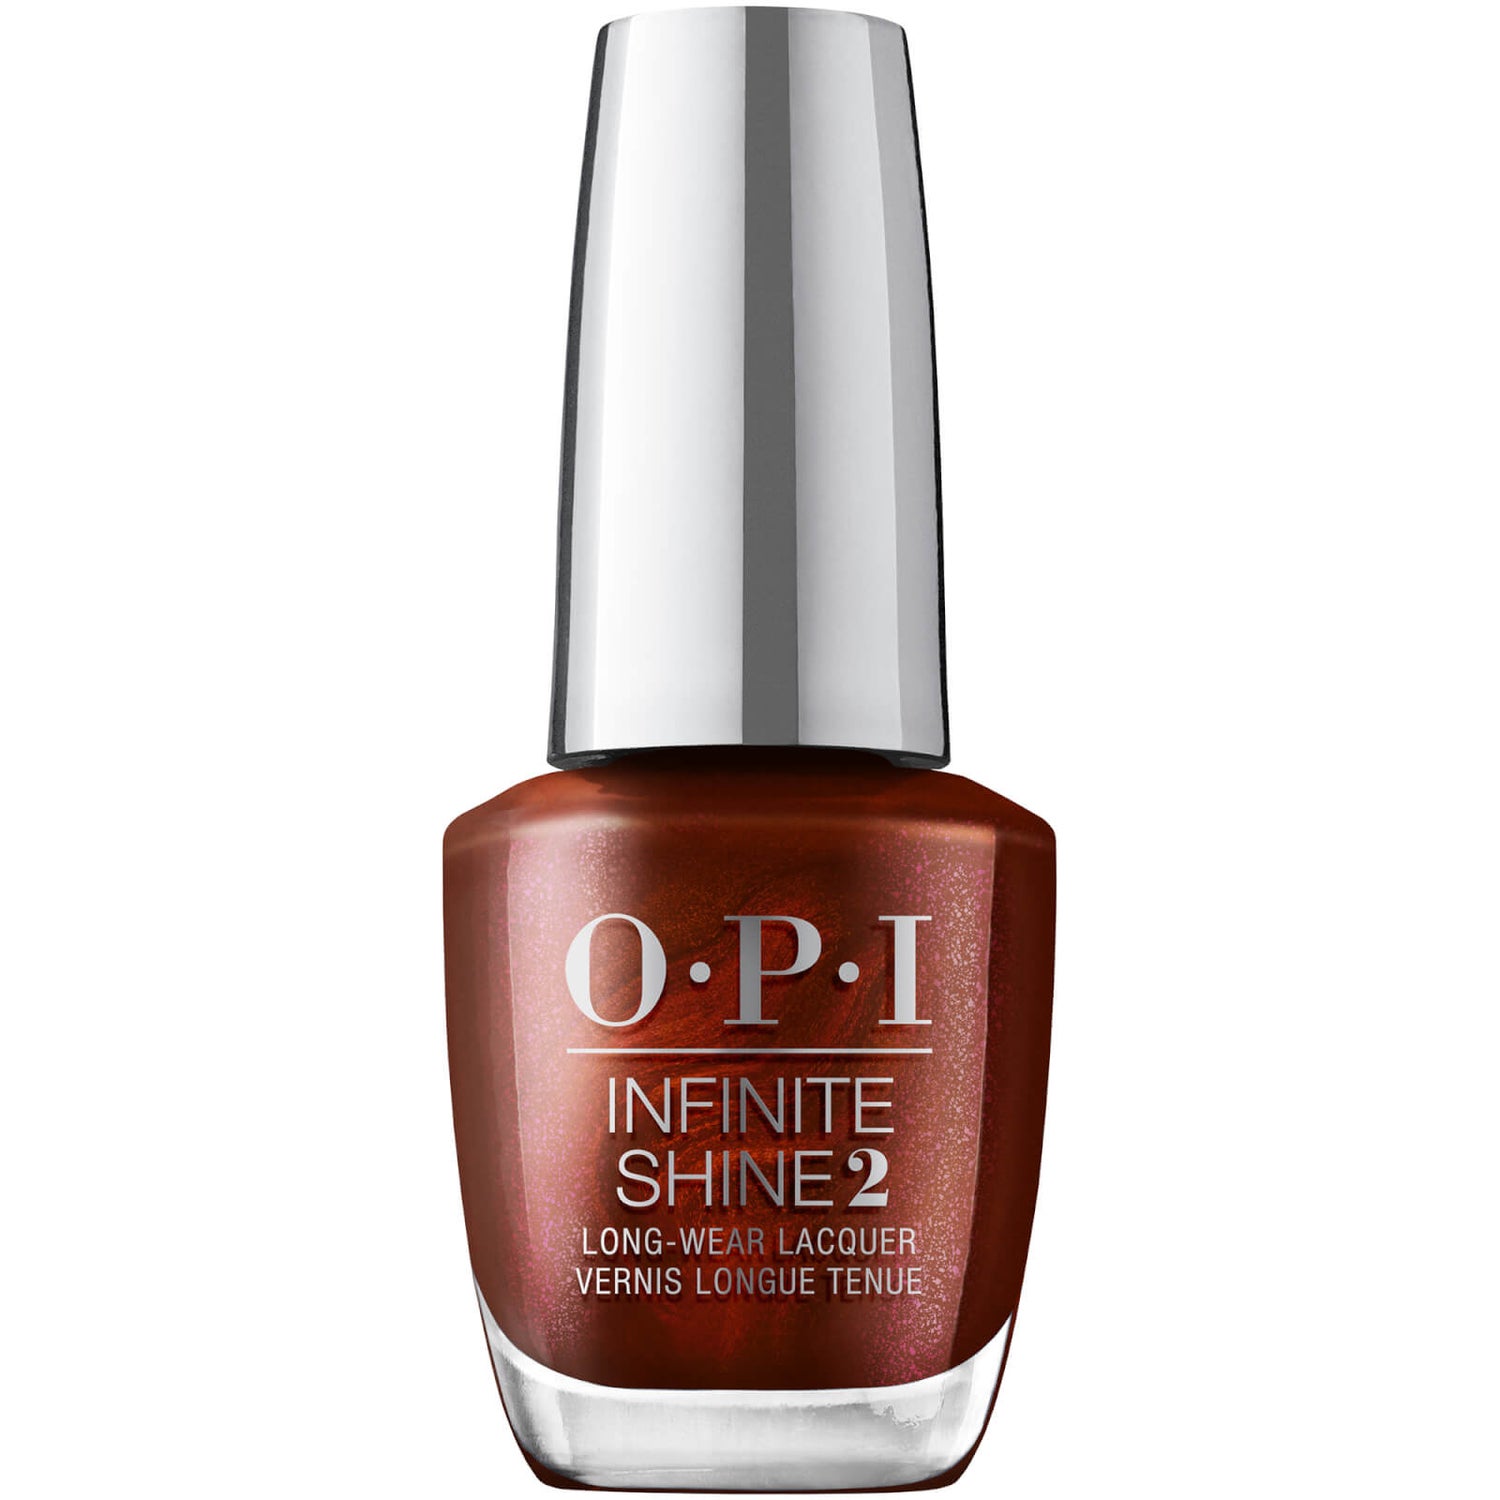 OPI Jewel Be Bold Collection Infinite Shine Nail Polish - Bring out the Big Gems